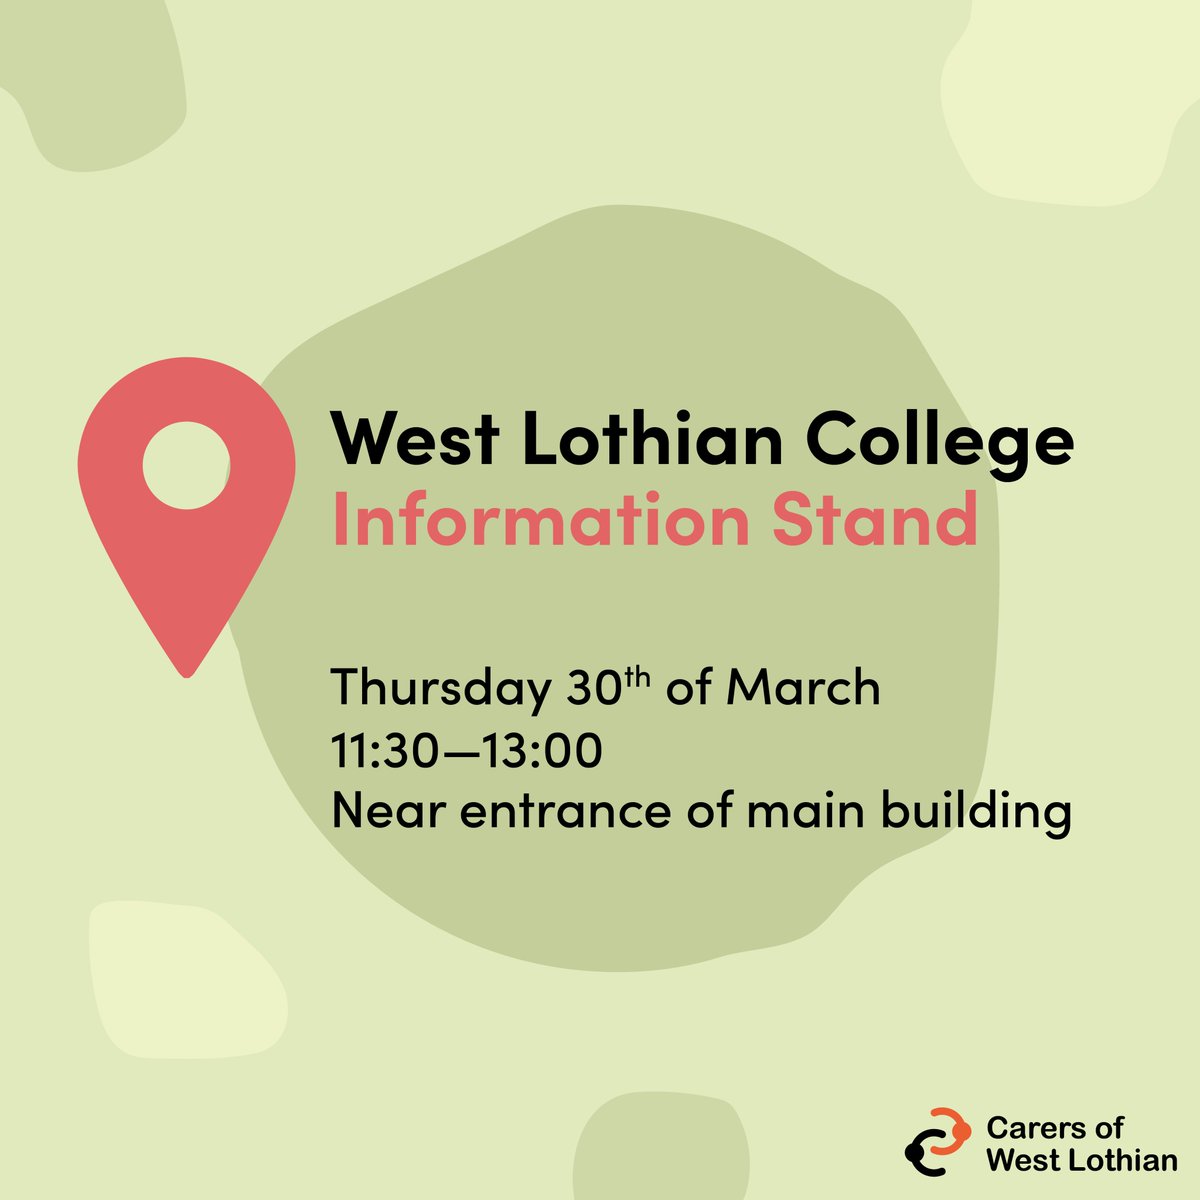 Come and find us at @WestLoCollege next Thursday, the 30th of March! We'll be right by the entrance of the main building to answer any questions you may have about our service.
Our stand will be there from 11:30 until 13:00 so why not pop along!